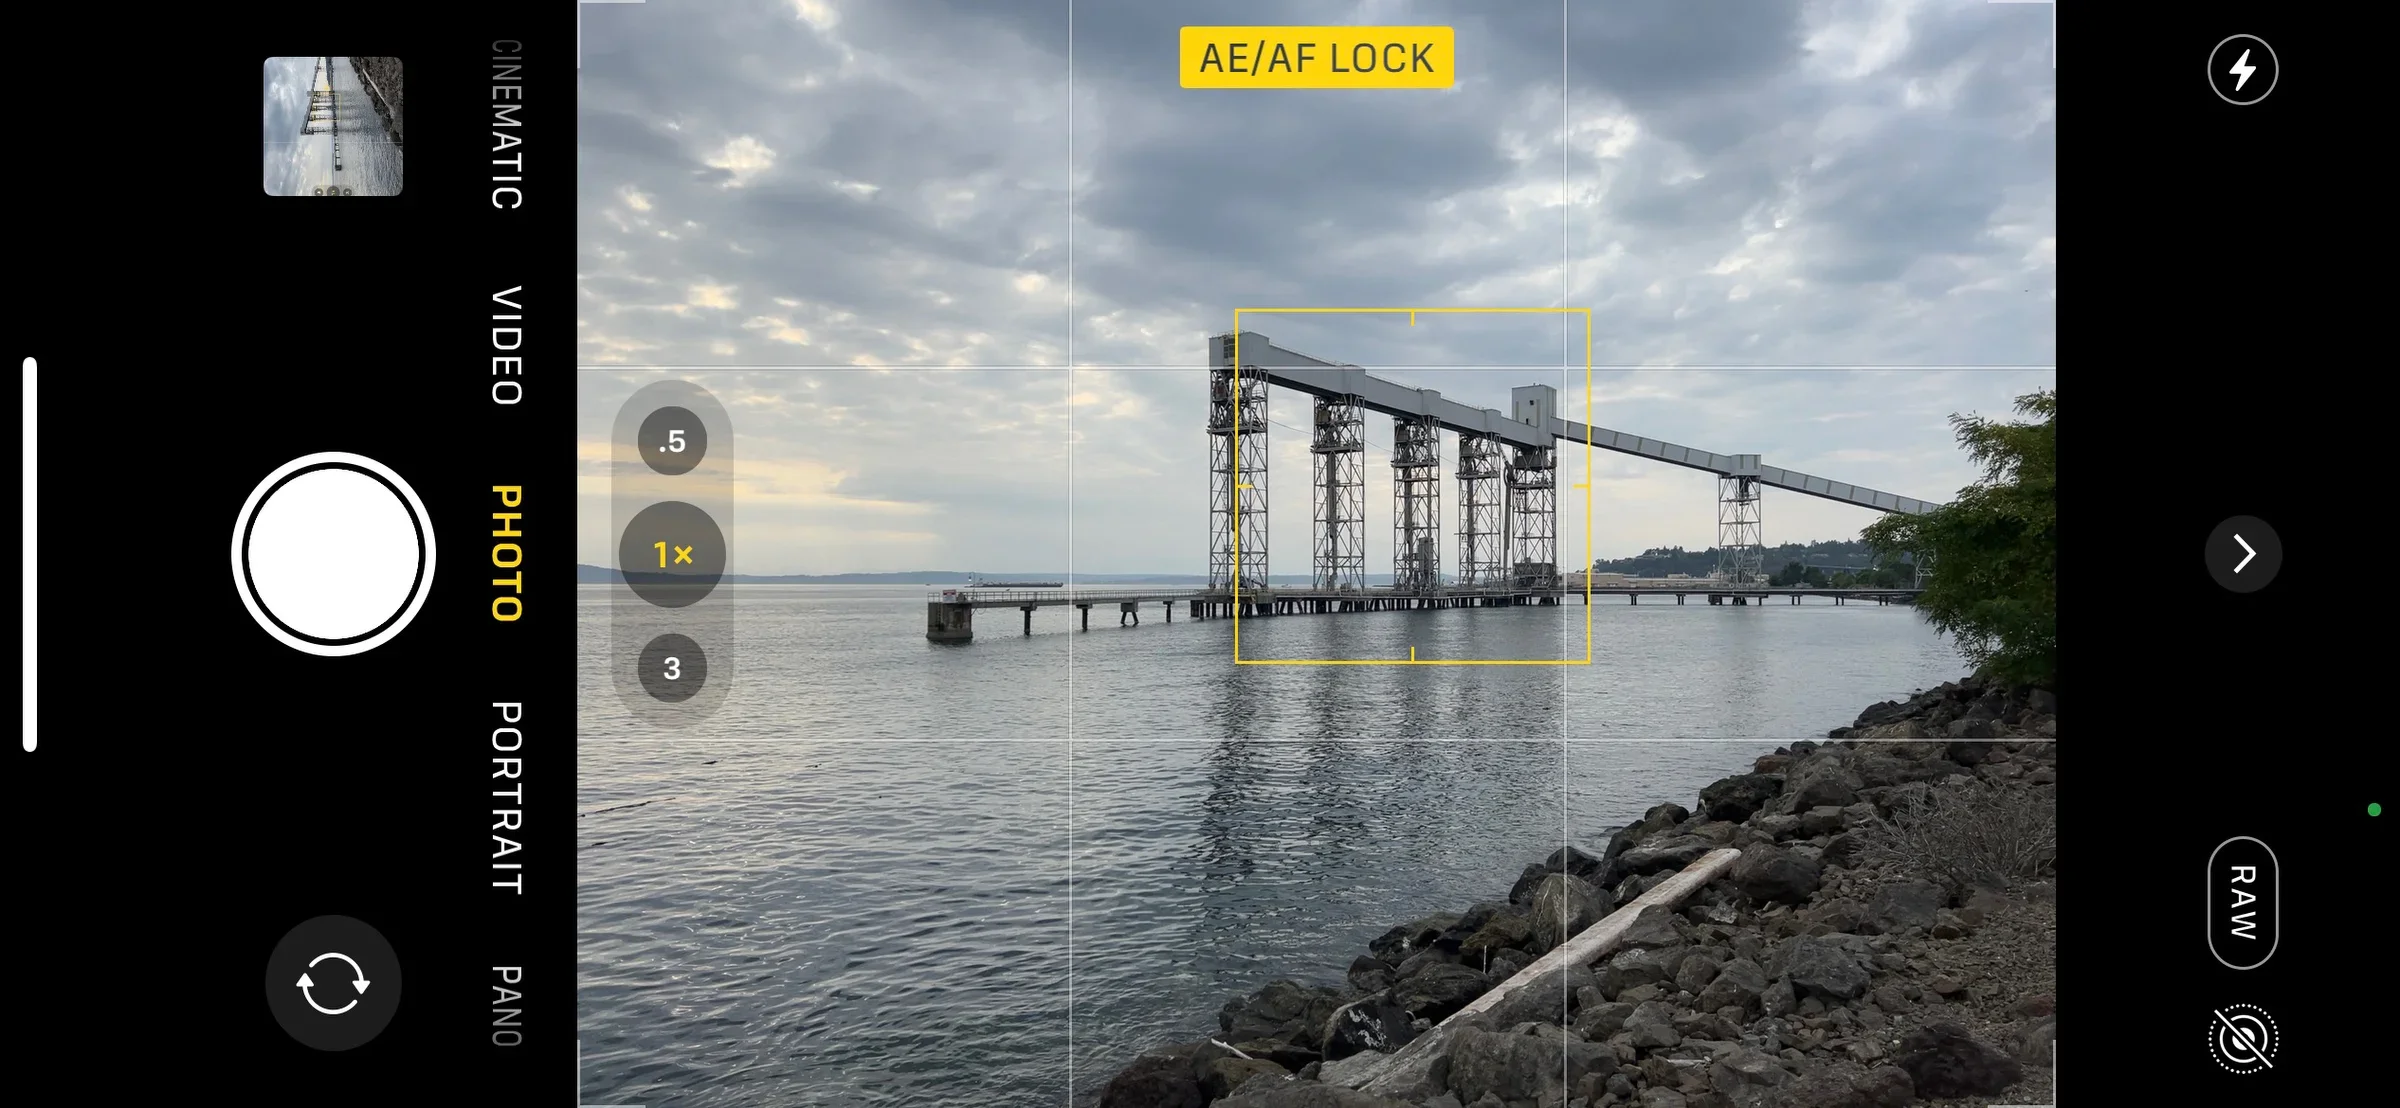 Your smartphone's camera has great hidden features - here's how to find them